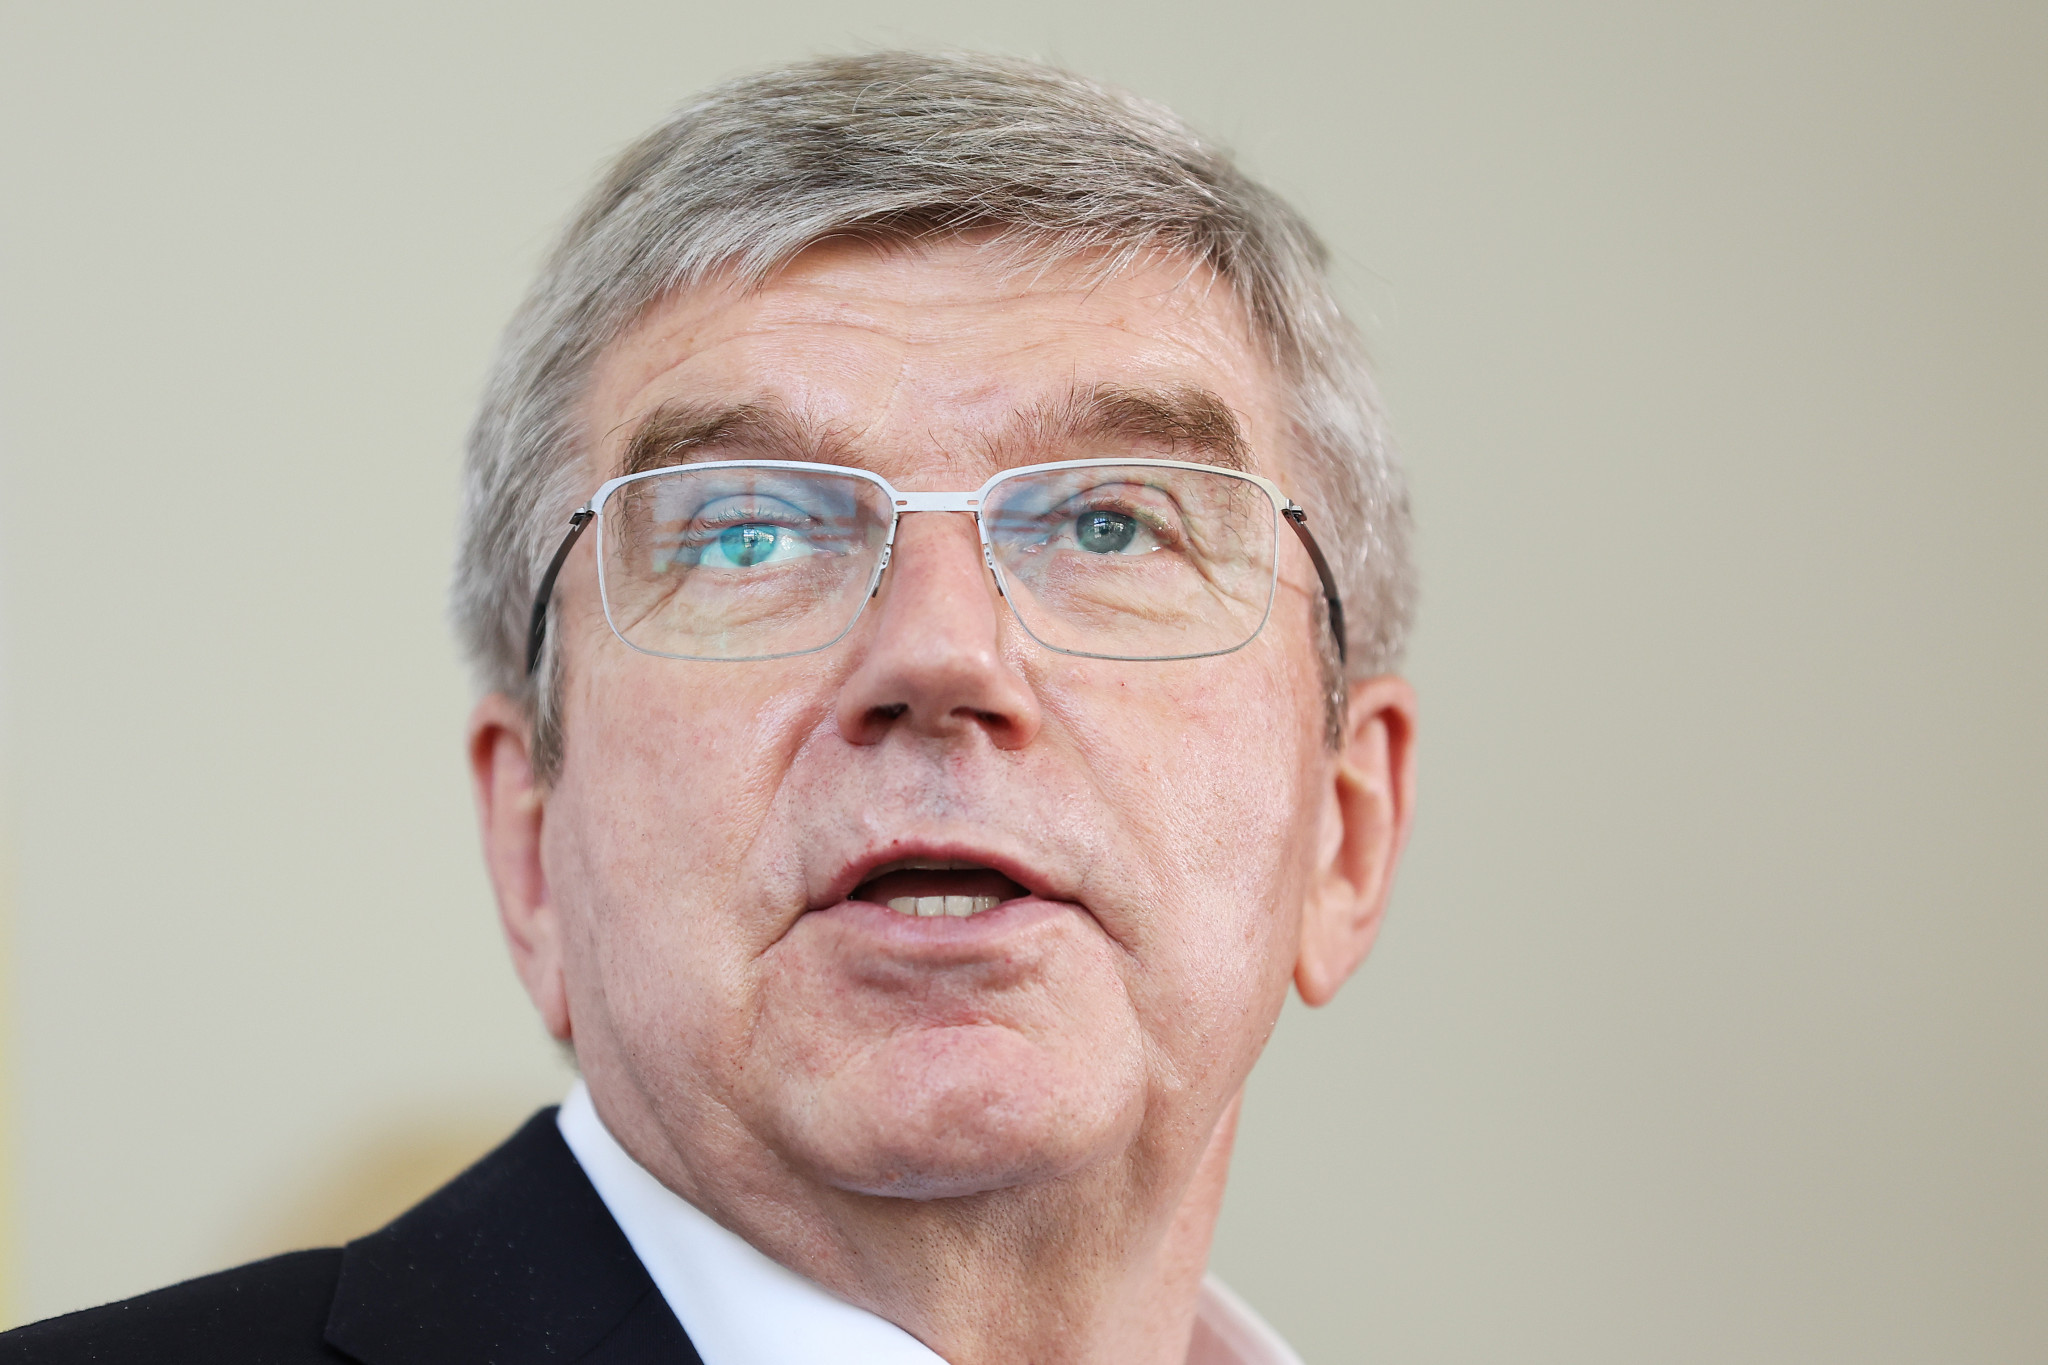 IOC President Bach meets athletes during visit to World Games